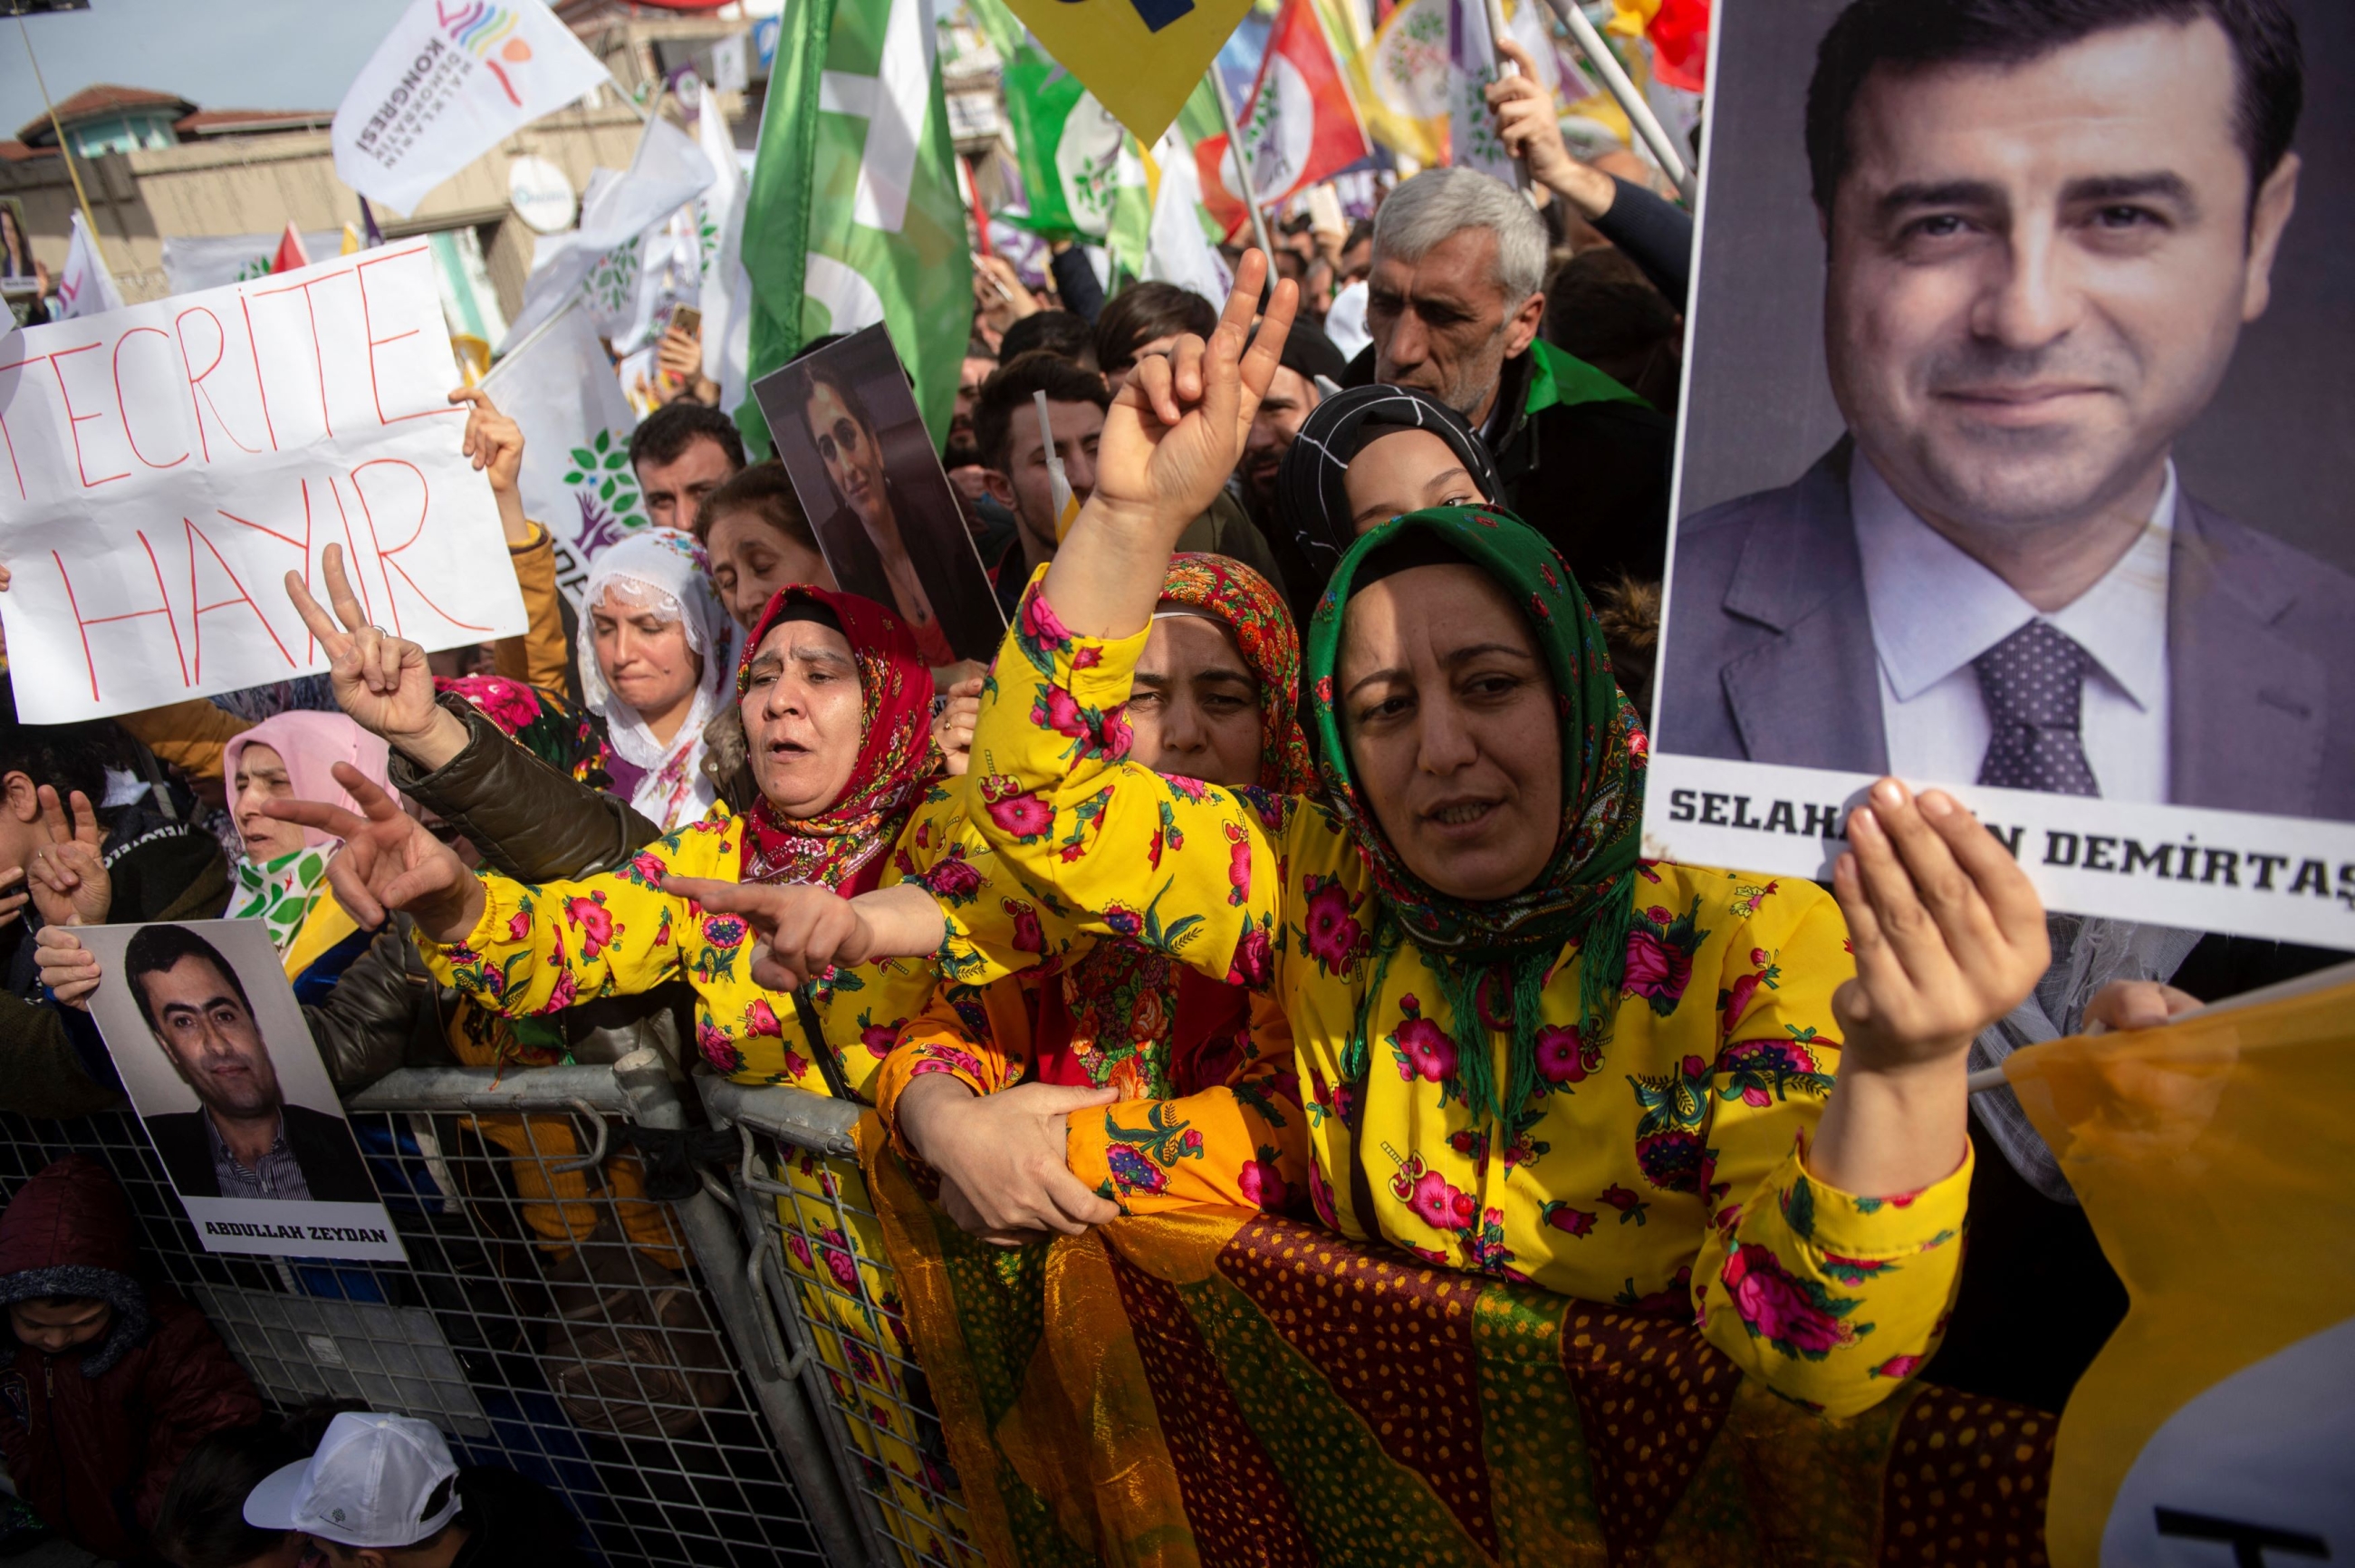 Supporters of the pro-Kurdish Peoples' Democratic Party (HDP) hold a picture of jailed former party leader Selahattin Demirtas as they attend a 'Peace and Justice' rally in Istanbul on February 3, 2019 (AFP)